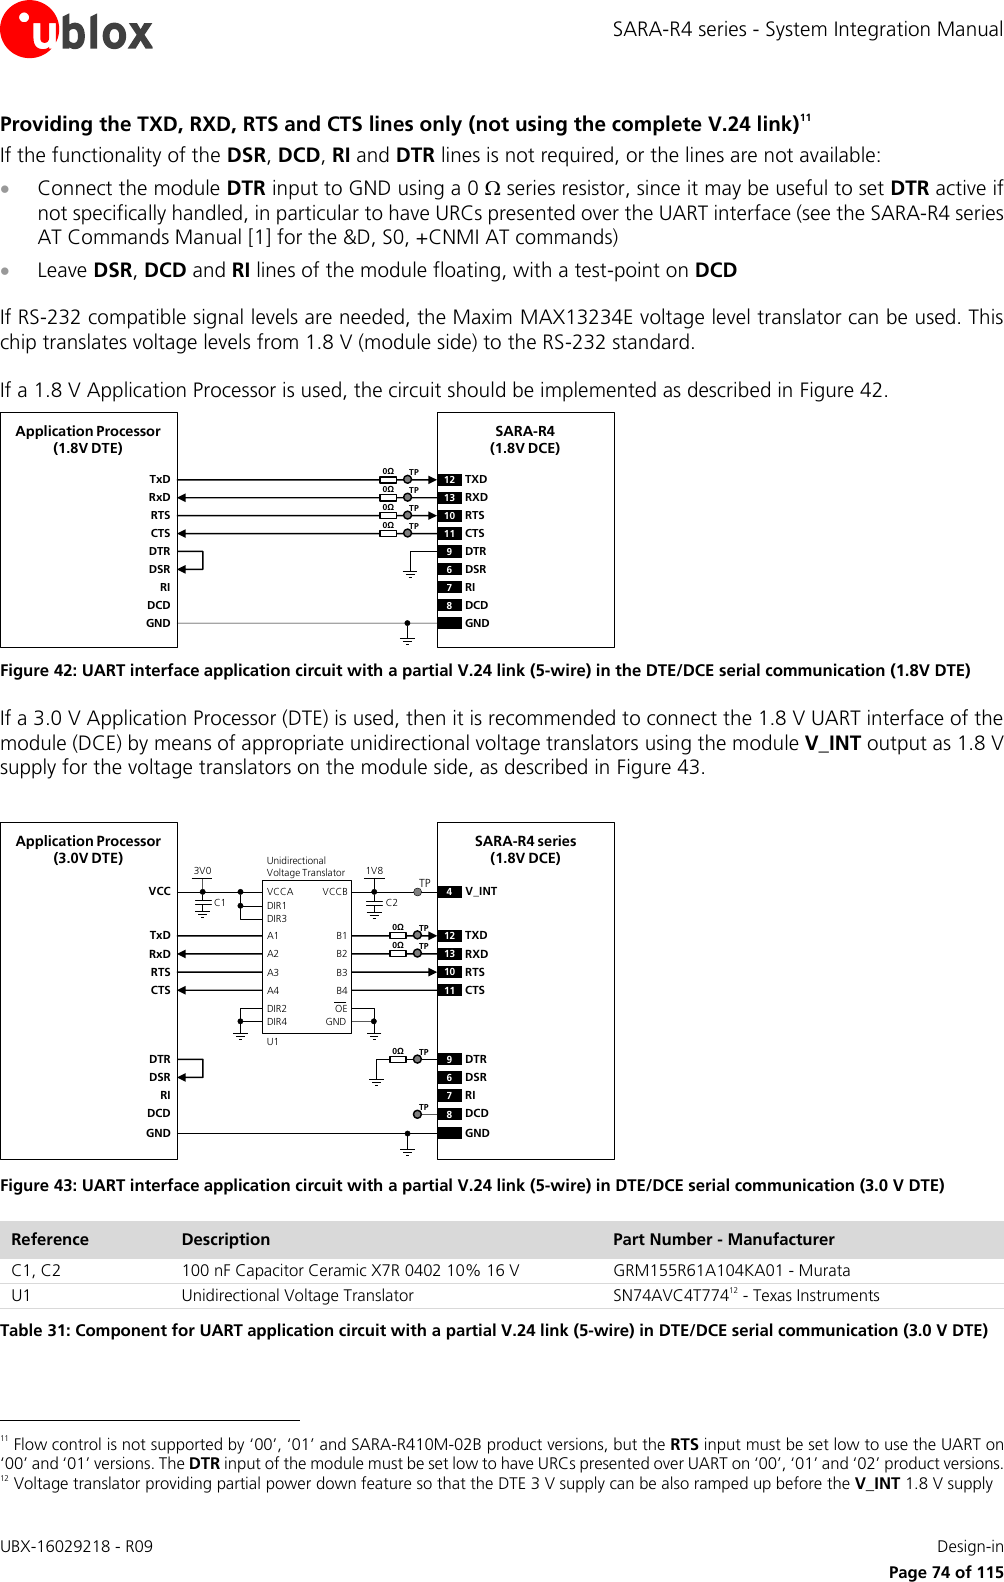 SARA-R4 series - System Integration Manual UBX-16029218 - R09    Design-in     Page 74 of 115 Providing the TXD, RXD, RTS and CTS lines only (not using the complete V.24 link)11 If the functionality of the DSR, DCD, RI and DTR lines is not required, or the lines are not available:  Connect the module DTR input to GND using a 0  series resistor, since it may be useful to set DTR active if not specifically handled, in particular to have URCs presented over the UART interface (see the SARA-R4 series AT Commands Manual [1] for the &amp;D, S0, +CNMI AT commands)  Leave DSR, DCD and RI lines of the module floating, with a test-point on DCD  If RS-232 compatible signal levels are needed, the Maxim MAX13234E voltage level translator can be used. This chip translates voltage levels from 1.8 V (module side) to the RS-232 standard.  If a 1.8 V Application Processor is used, the circuit should be implemented as described in Figure 42.  TxDApplication Processor(1.8V DTE)RxDRTSCTSDTRDSRRIDCDGNDSARA-R4(1.8V DCE)12 TXD9DTR13 RXD10 RTS11 CTS6DSR7RI8DCDGND0ΩTP0ΩTP0ΩTP0ΩTP Figure 42: UART interface application circuit with a partial V.24 link (5-wire) in the DTE/DCE serial communication (1.8V DTE) If a 3.0 V Application Processor (DTE) is used, then it is recommended to connect the 1.8 V UART interface of the module (DCE) by means of appropriate unidirectional voltage translators using the module V_INT output as 1.8 V supply for the voltage translators on the module side, as described in Figure 43.  4V_INTTxDApplication Processor(3.0V DTE)RxDRTSCTSDTRDSRRIDCDGNDSARA-R4 series (1.8V DCE)12 TXD9DTR13 RXD10 RTS11 CTS6DSR7RI8DCDGND1V8B1 A1GNDU1B3A3VCCBVCCAUnidirectionalVoltage TranslatorC1 C23V0DIR3DIR2 OEDIR1VCCB2 A2B4A4DIR4TP0ΩTP0ΩTP0ΩTPTP Figure 43: UART interface application circuit with a partial V.24 link (5-wire) in DTE/DCE serial communication (3.0 V DTE) Reference Description Part Number - Manufacturer C1, C2 100 nF Capacitor Ceramic X7R 0402 10% 16 V GRM155R61A104KA01 - Murata U1 Unidirectional Voltage Translator SN74AVC4T77412 - Texas Instruments Table 31: Component for UART application circuit with a partial V.24 link (5-wire) in DTE/DCE serial communication (3.0 V DTE)                                                       11 Flow control is not supported by ‘00’, ‘01’ and SARA-R410M-02B product versions, but the RTS input must be set low to use the UART on ‘00’ and ‘01’ versions. The DTR input of the module must be set low to have URCs presented over UART on ‘00’, ‘01’ and ‘02’ product versions. 12 Voltage translator providing partial power down feature so that the DTE 3 V supply can be also ramped up before the V_INT 1.8 V supply 